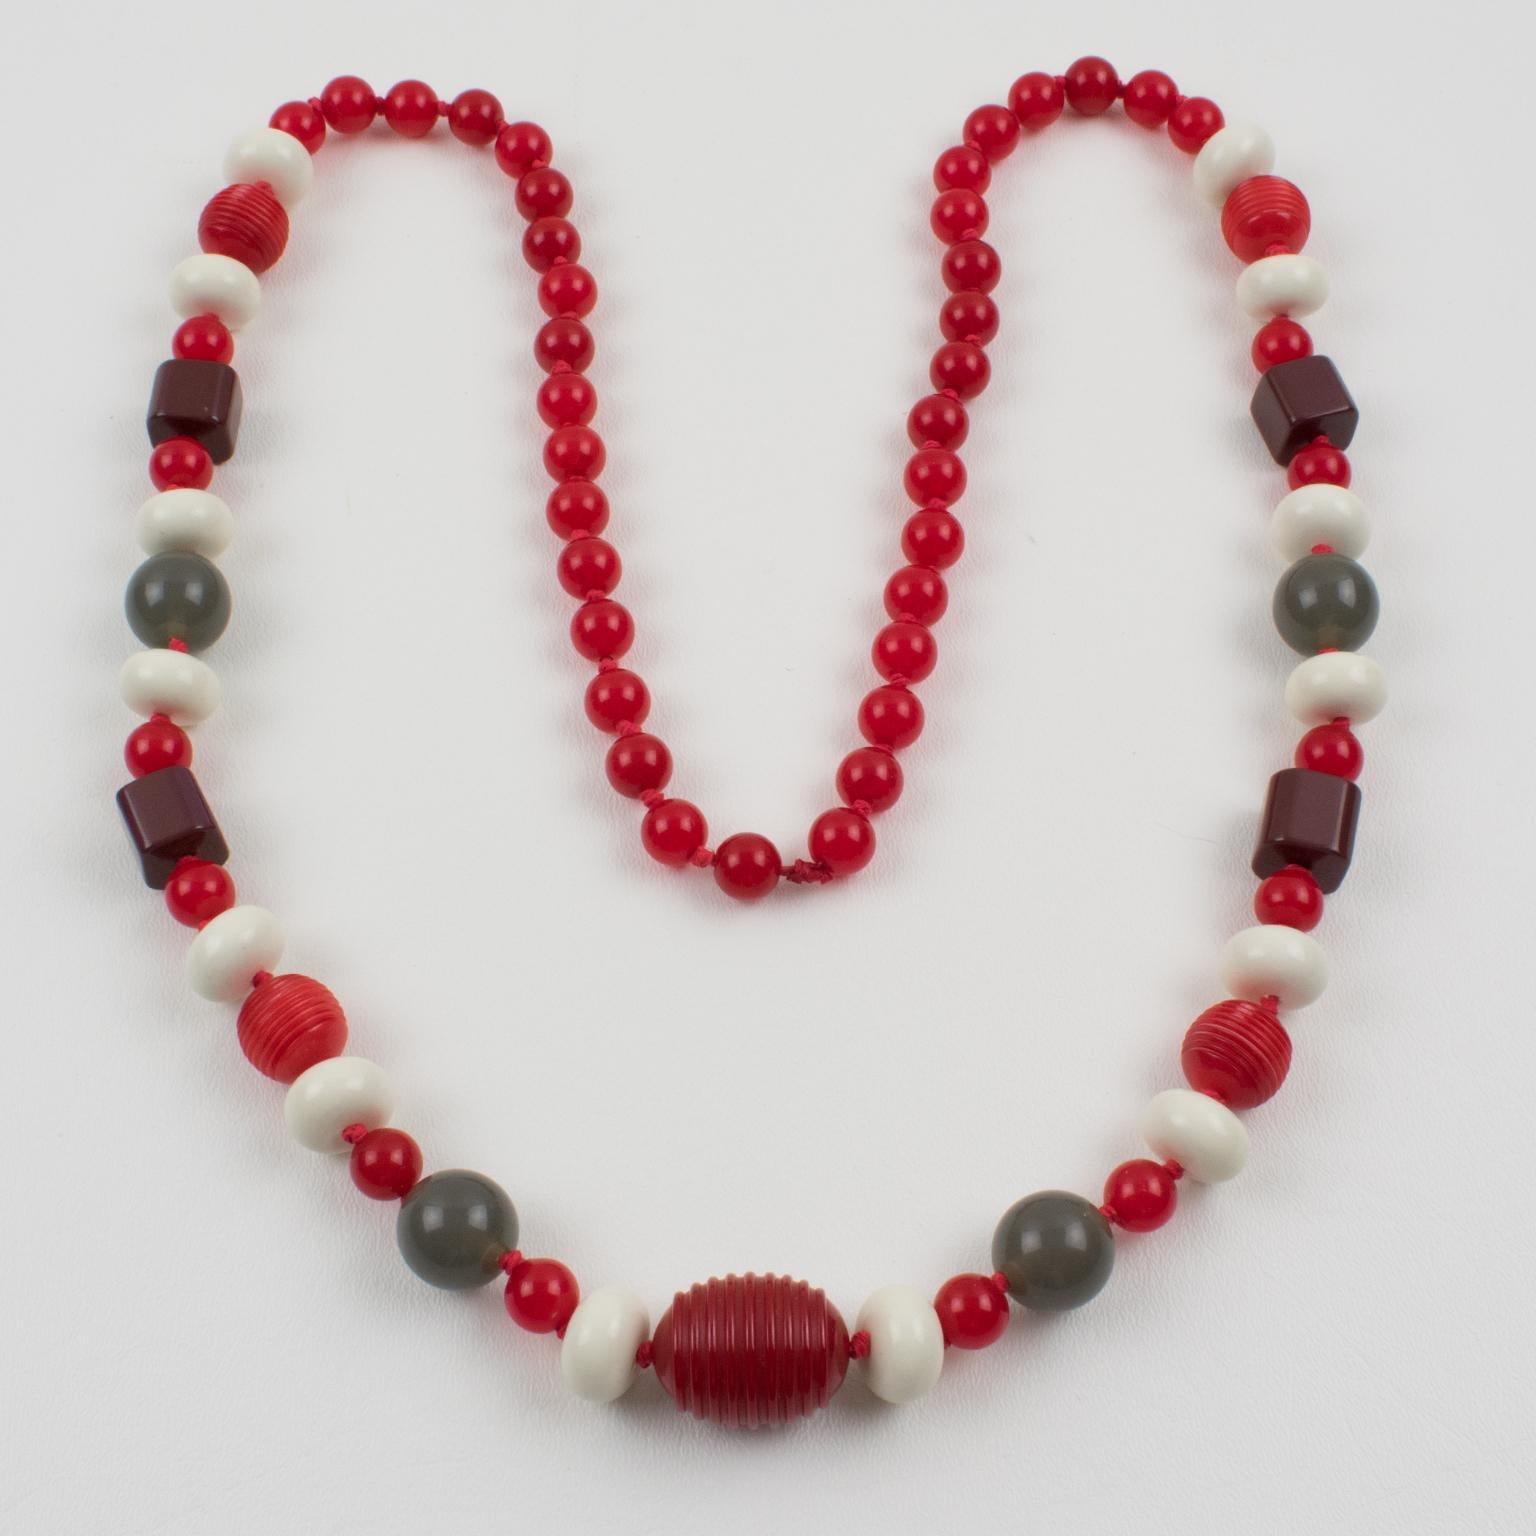 Bakelite and Lucite Long Necklace Gray, White, and Red Colors In Excellent Condition For Sale In Atlanta, GA